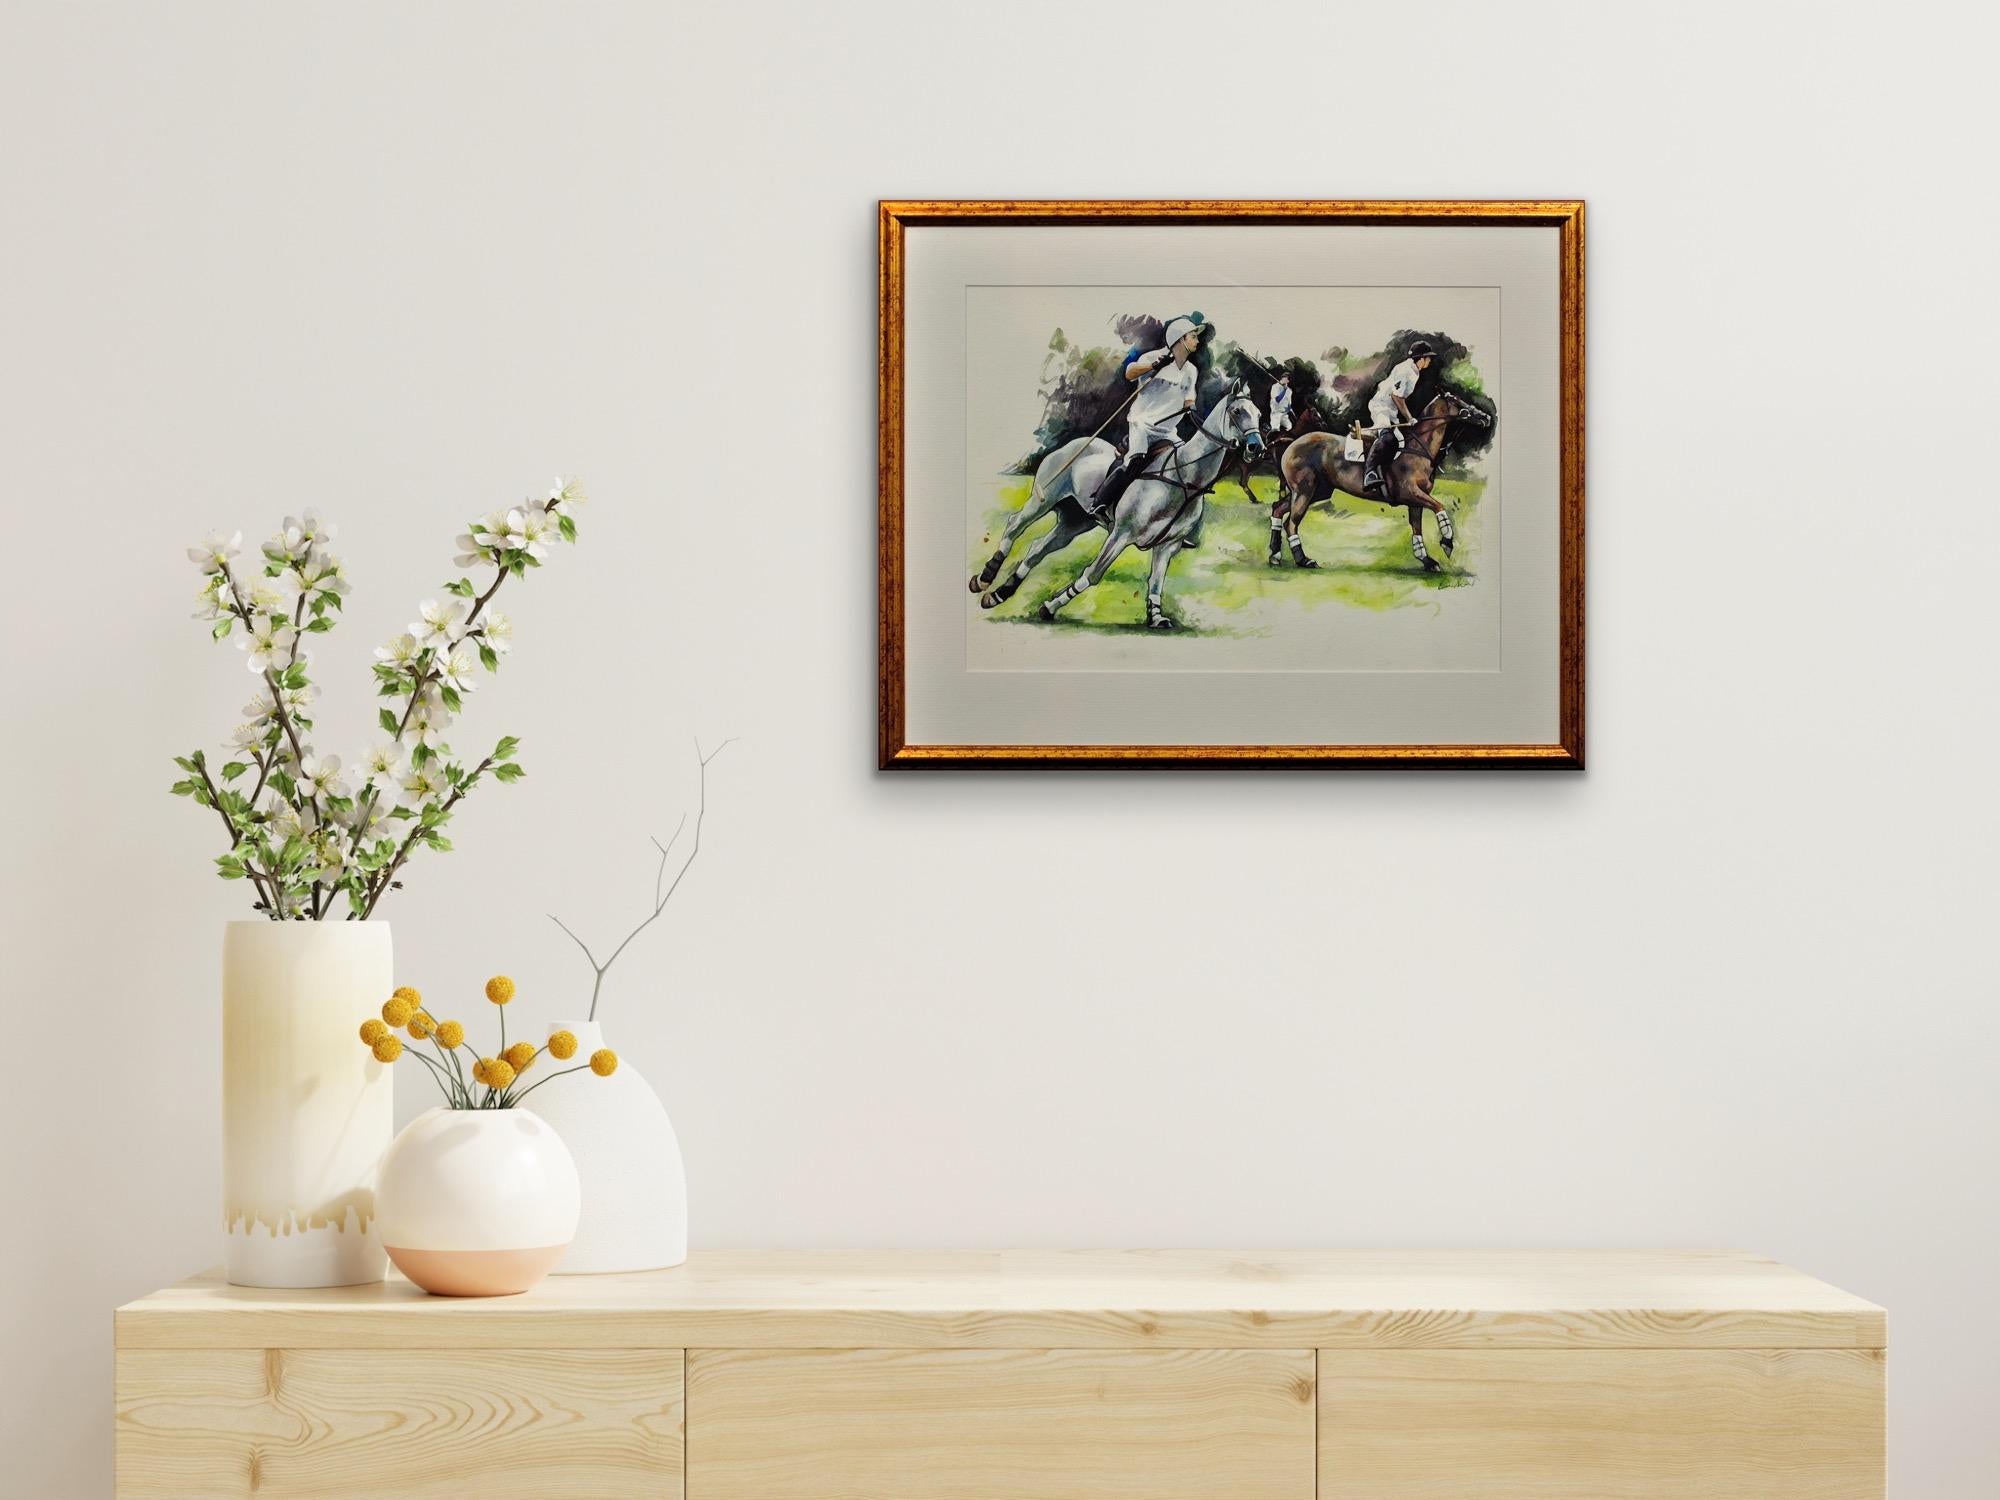 Polo Match, Cirencester, The First Chukka. Cotswolds. Parkland.Framed Watercolor For Sale 5